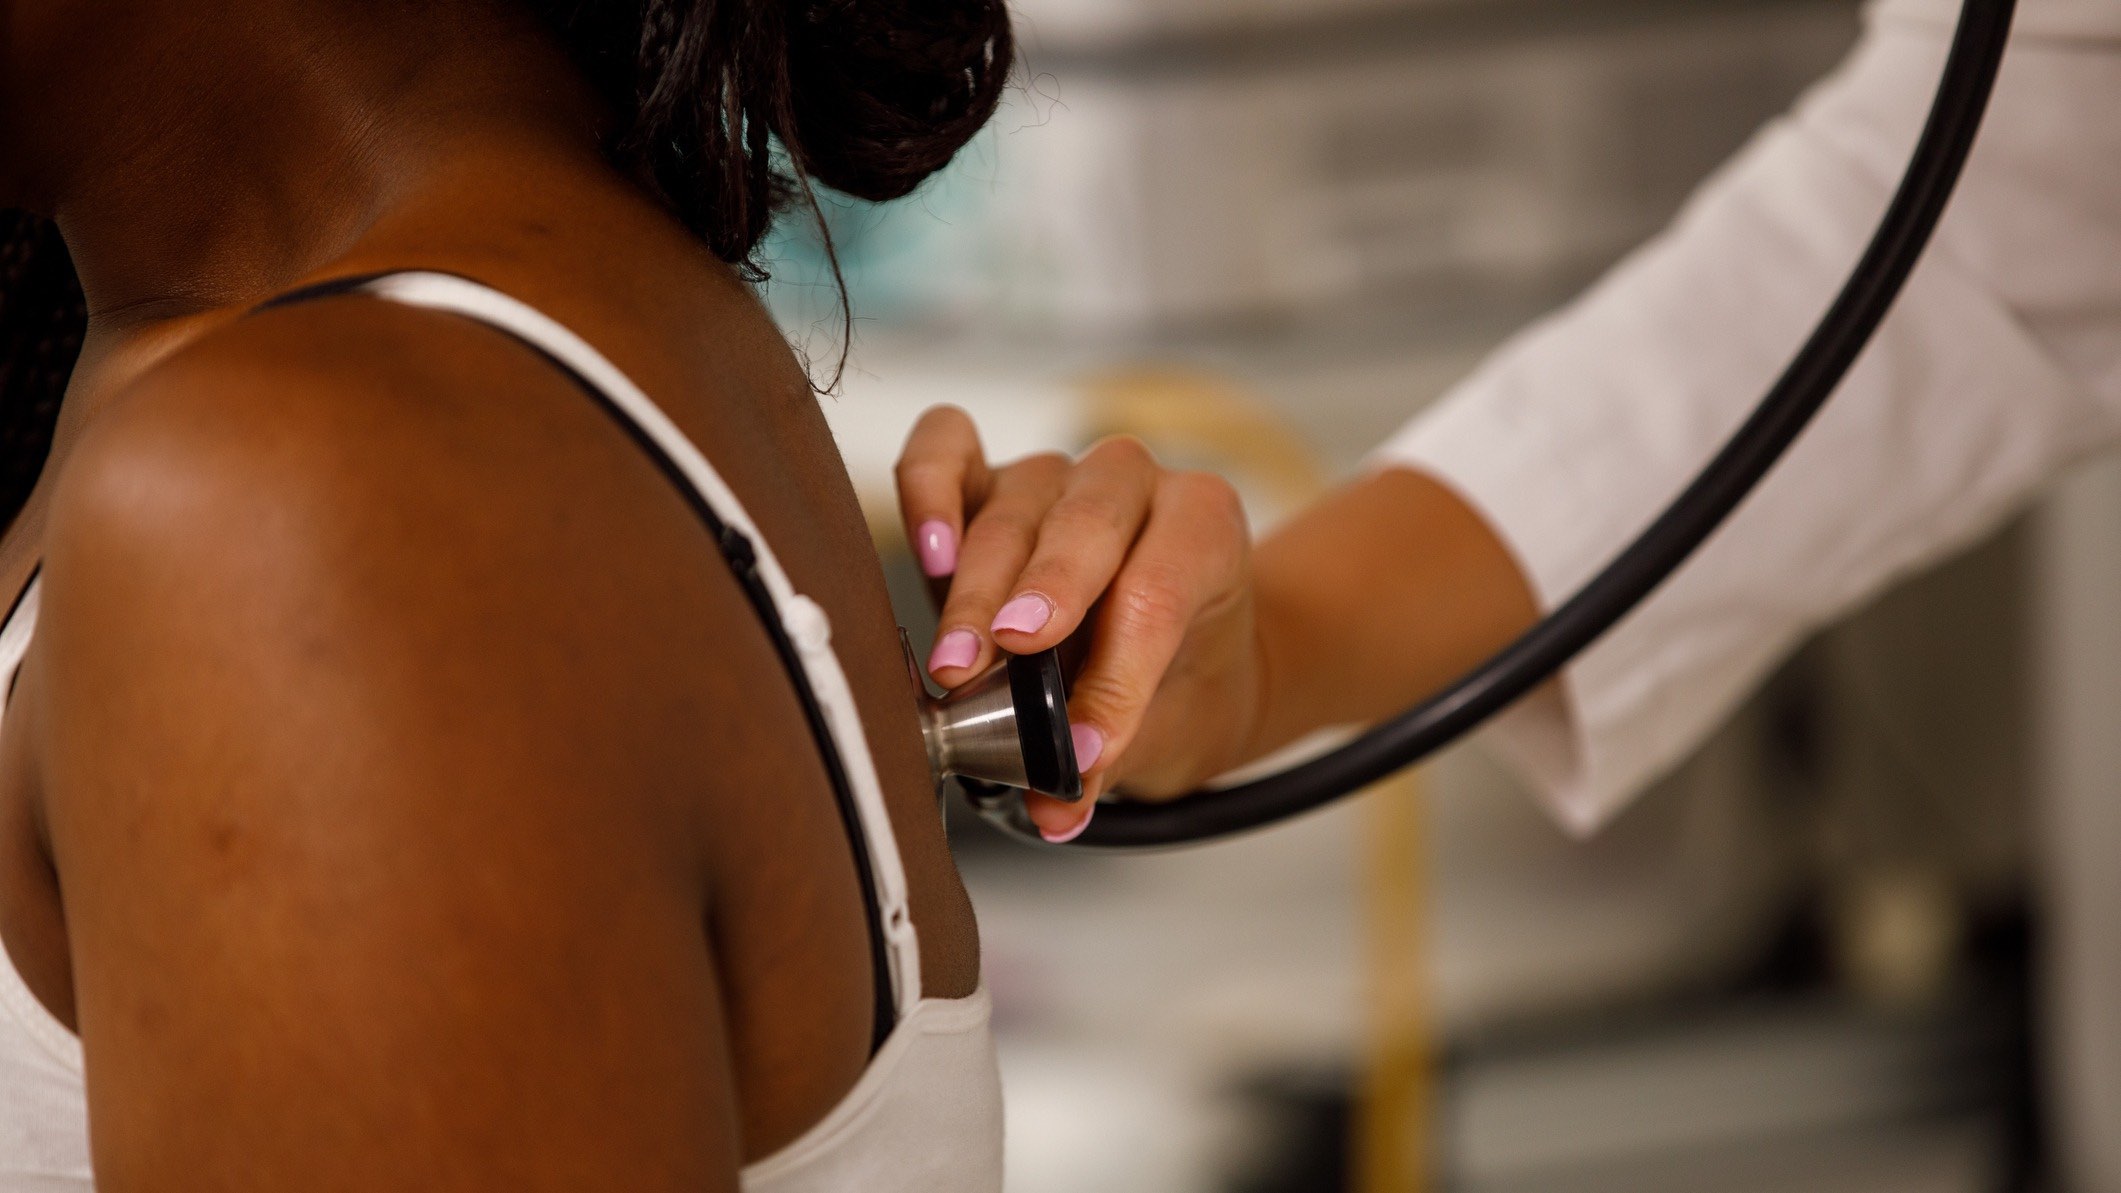 A doctor holds a stethoscope against a woman's shoulder blade.